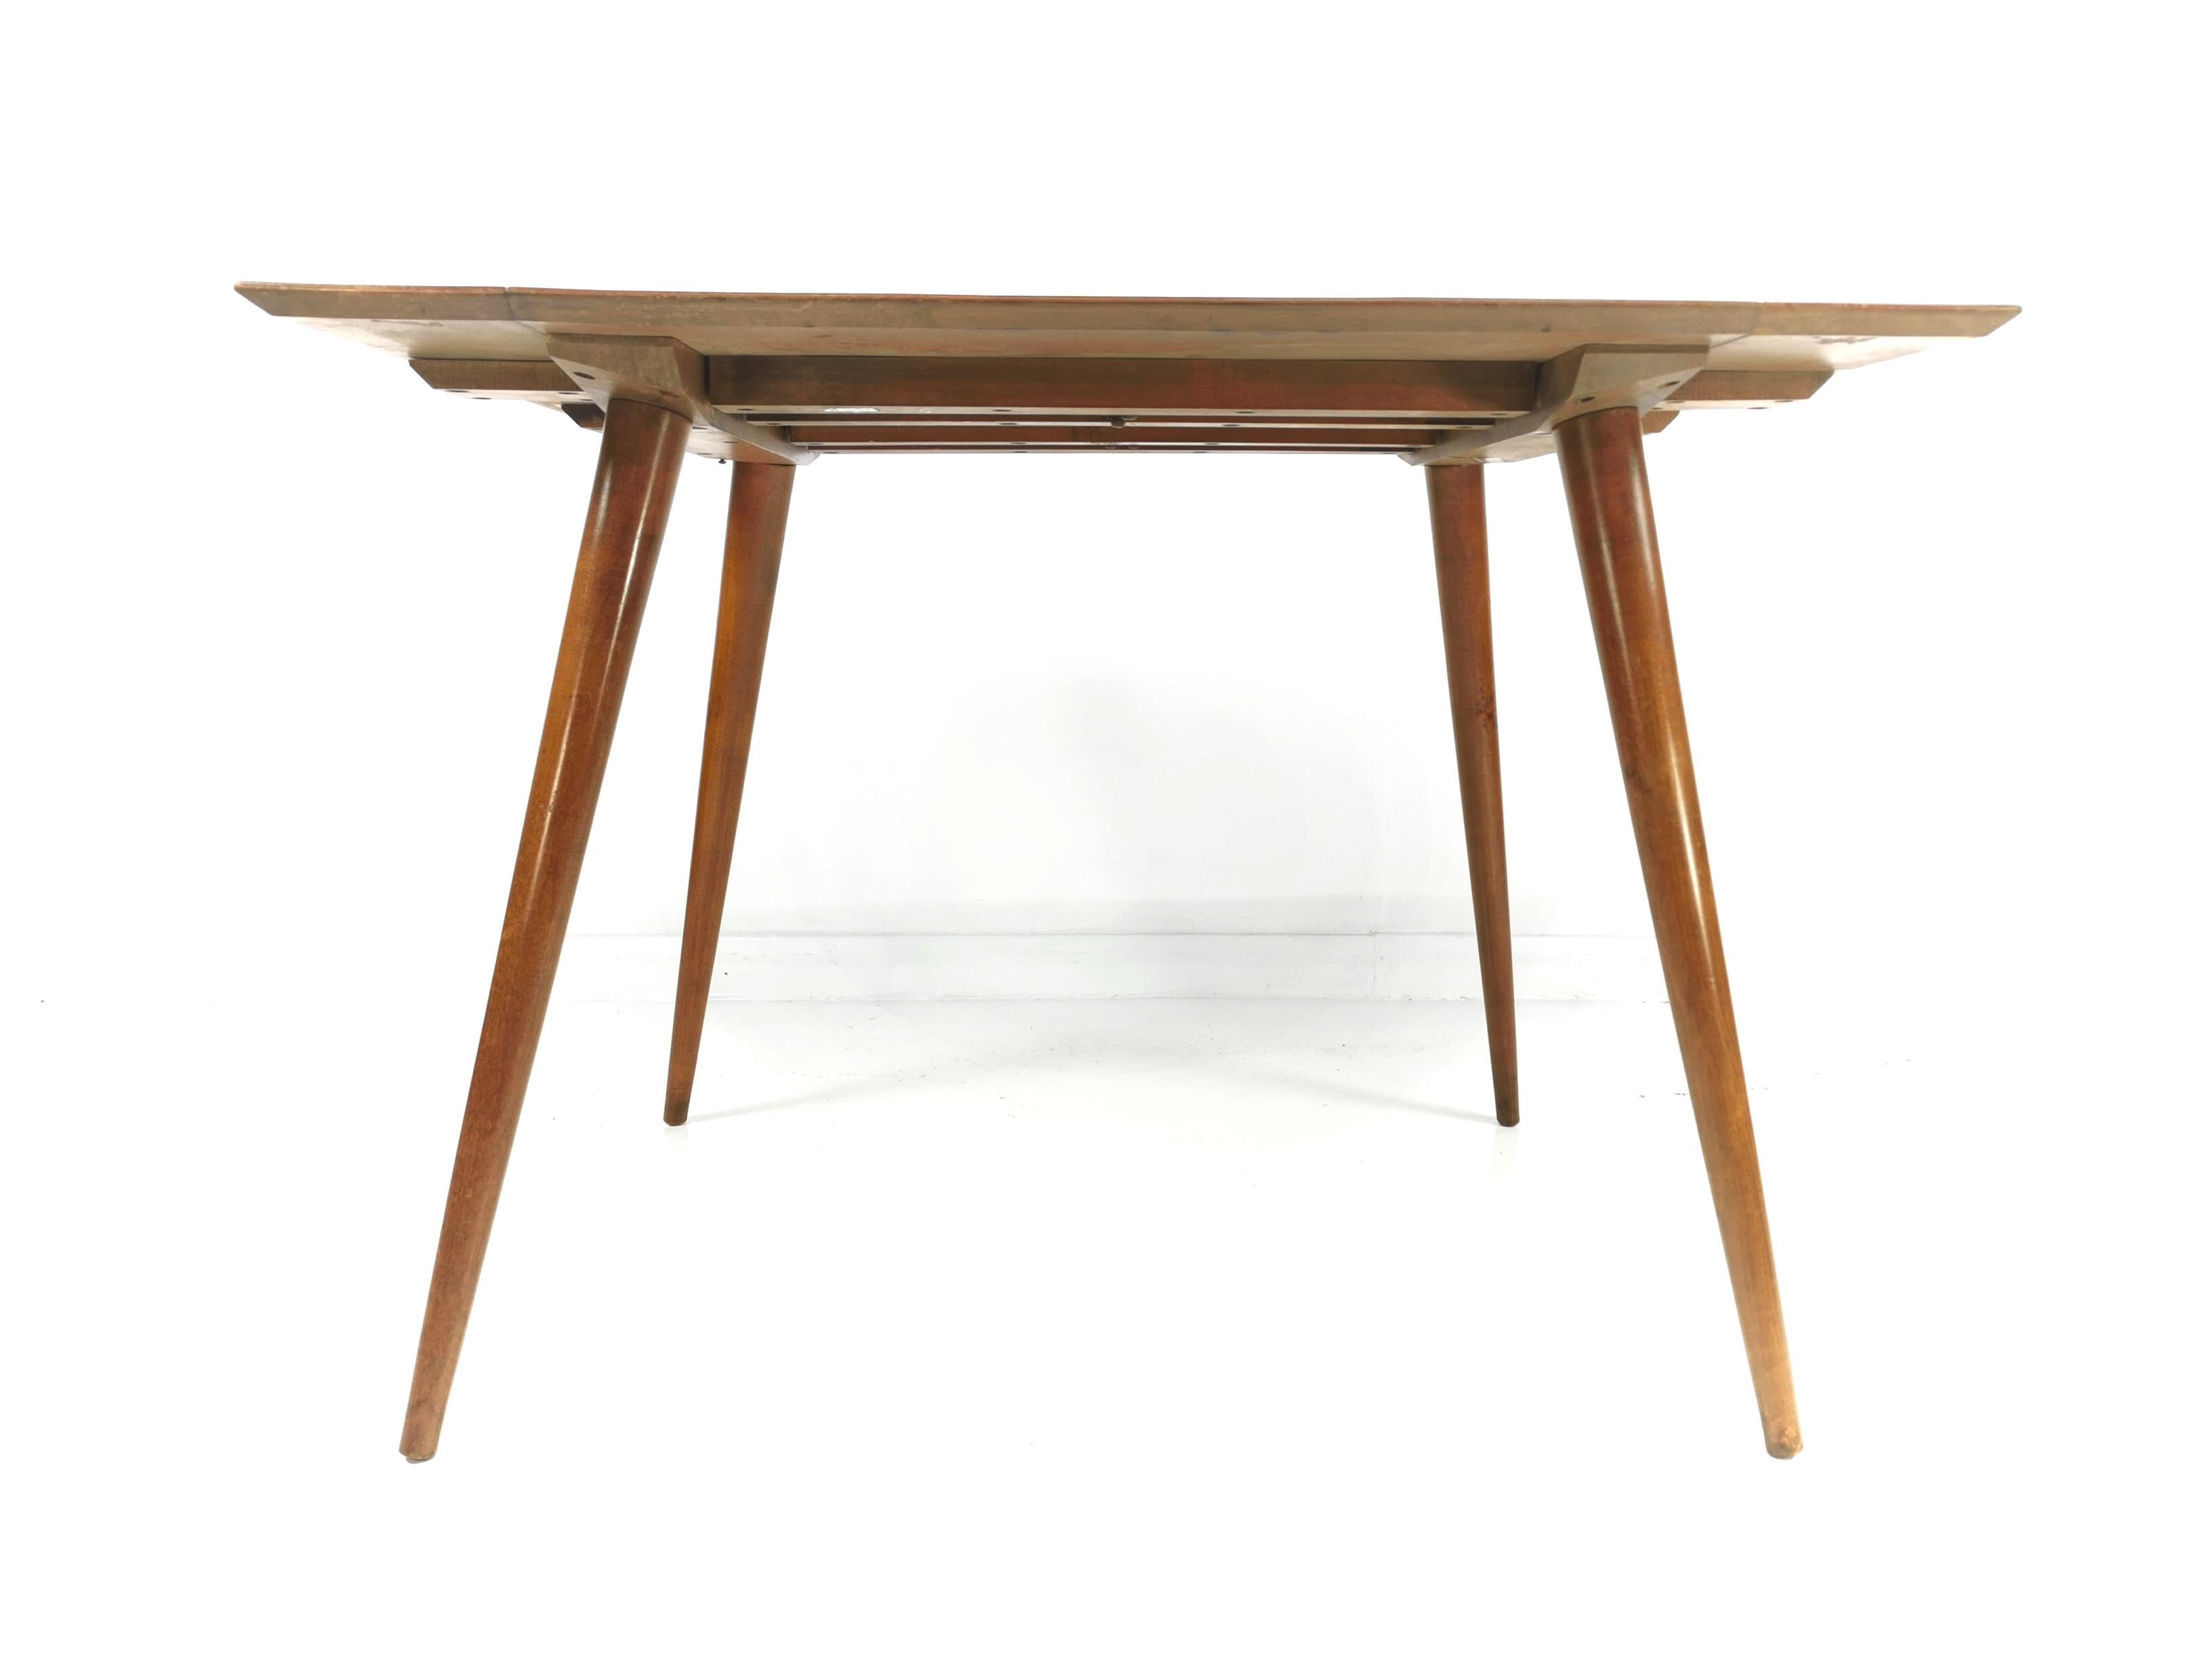 Paul McCobb dining table or desk

Paul McCobb Planner Group, 1950s extending dining table for Winchendon Furniture, USA. 

Versatile size to fit in any room. Use a general table, dining table or desk.

The maple frame features the splayed, tapered